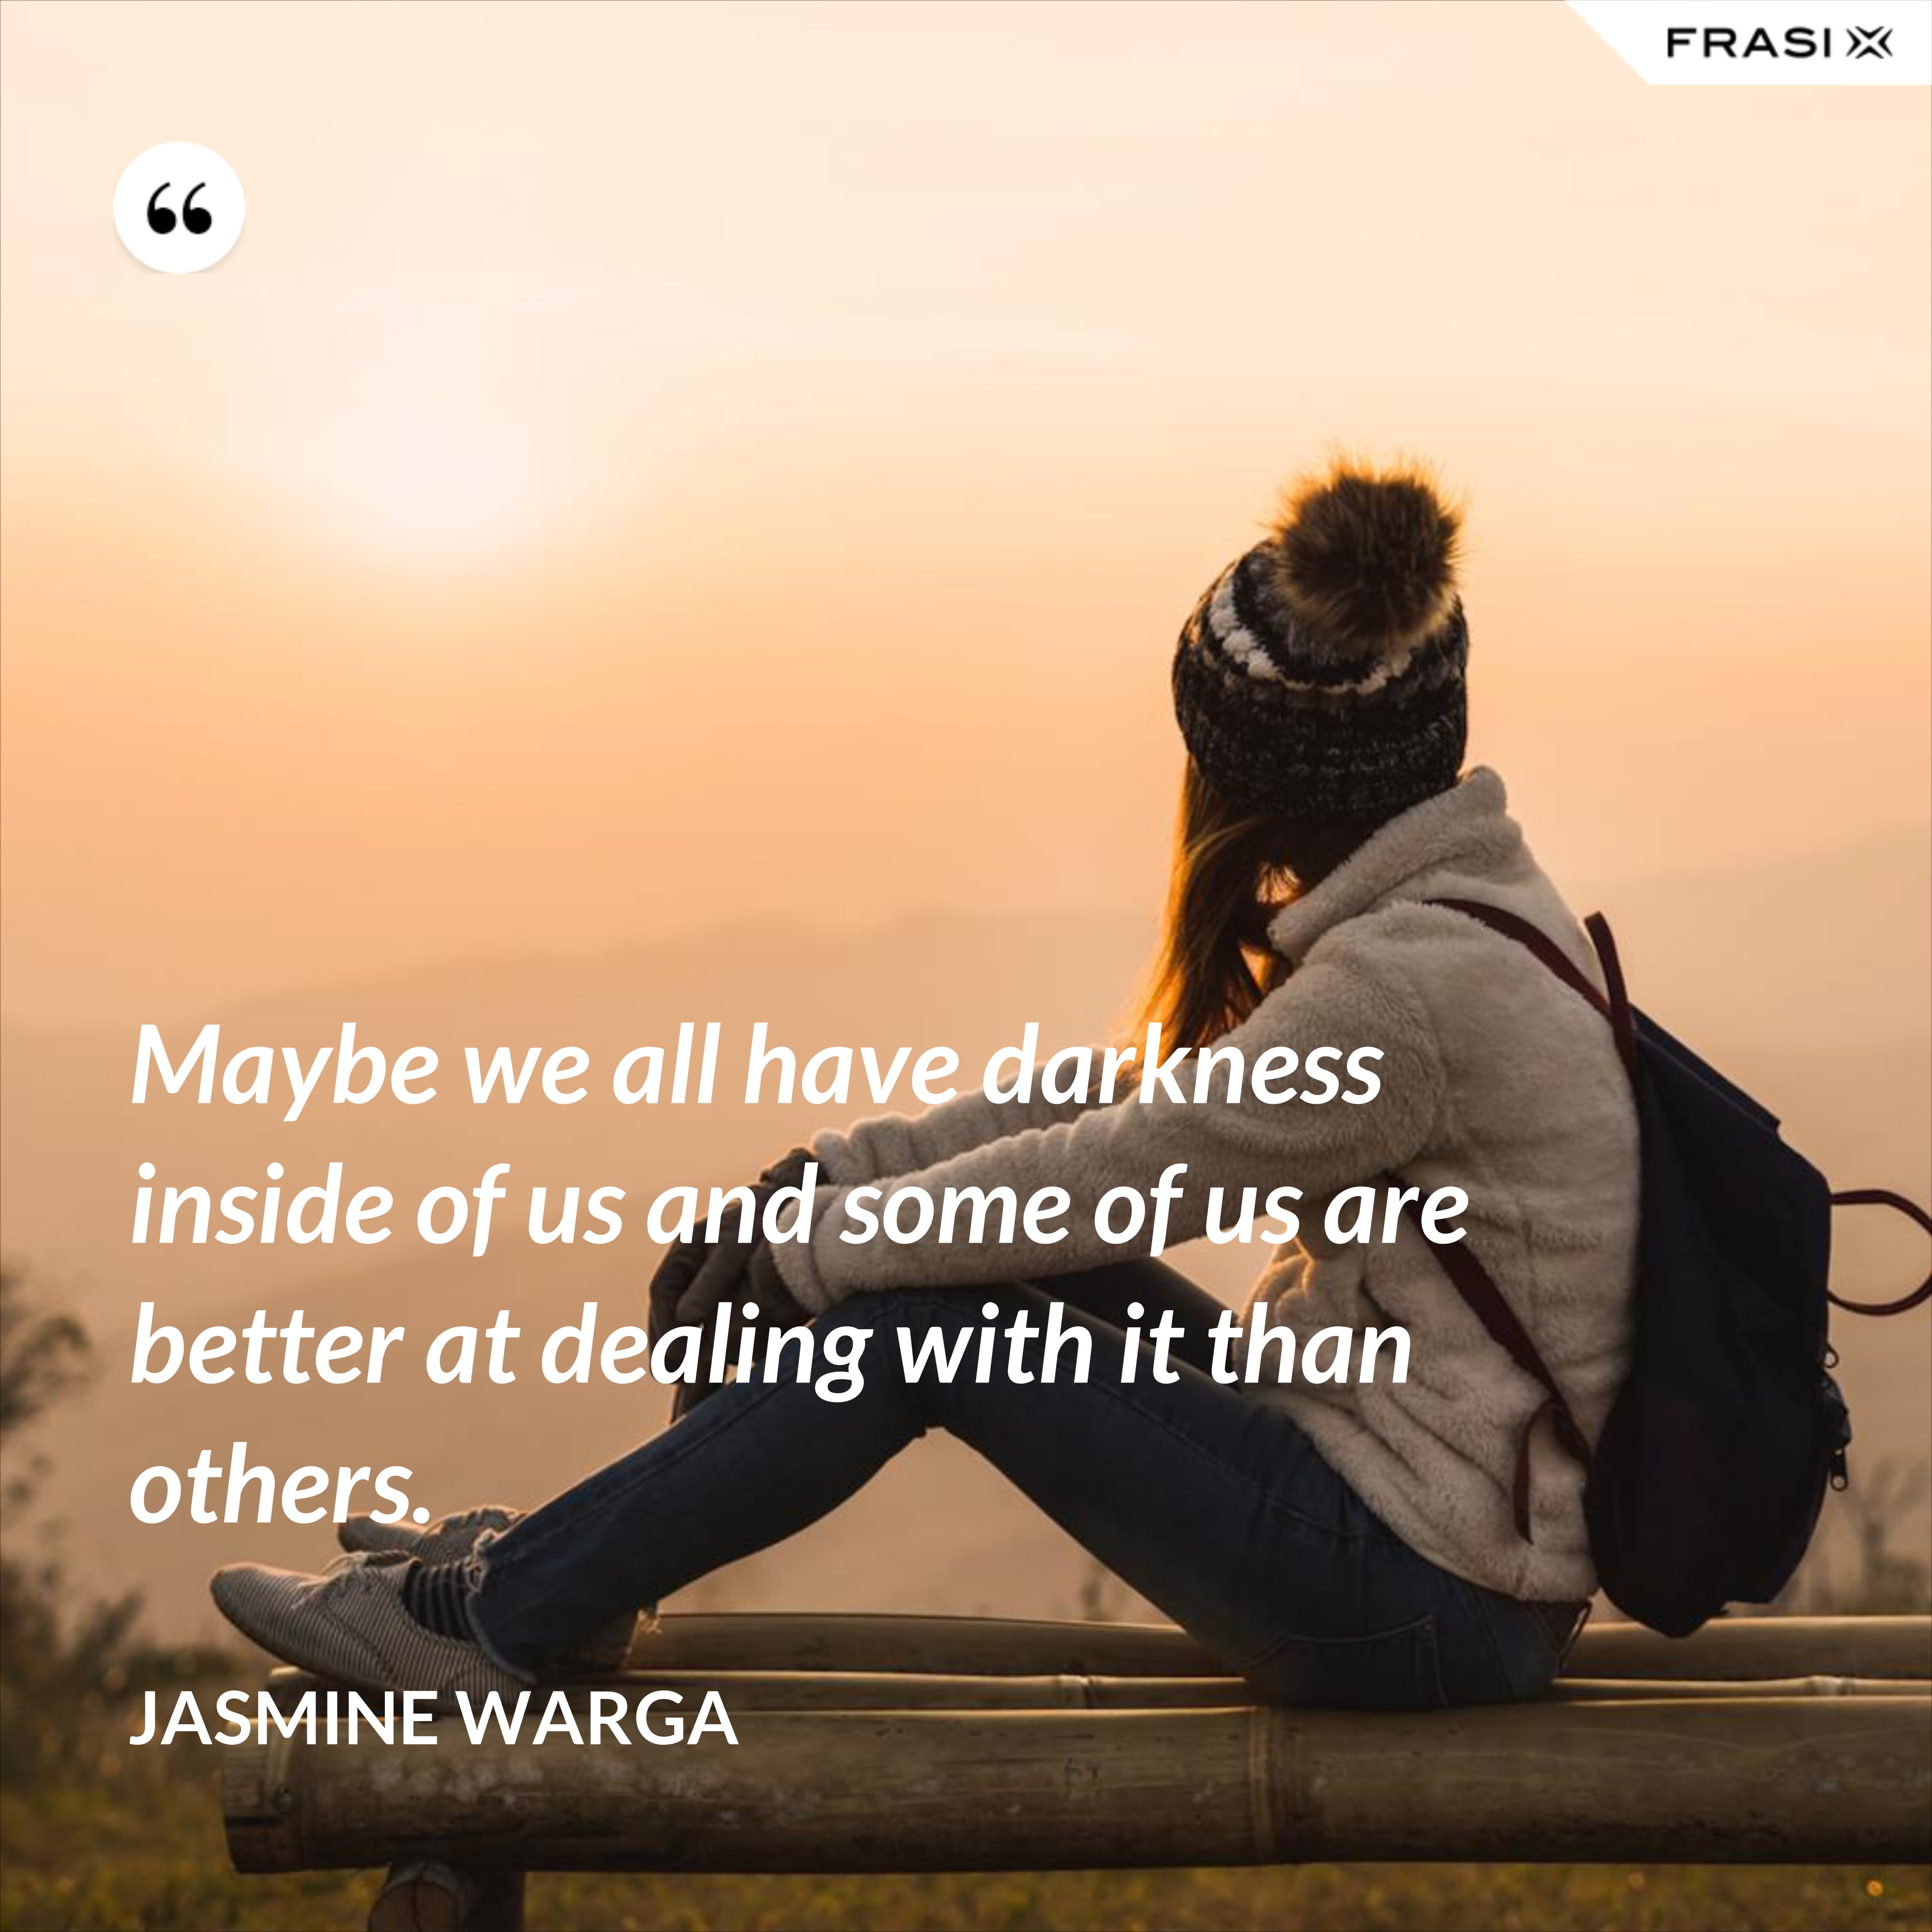 Maybe we all have darkness inside of us and some of us are better at dealing with it than others. - Jasmine Warga